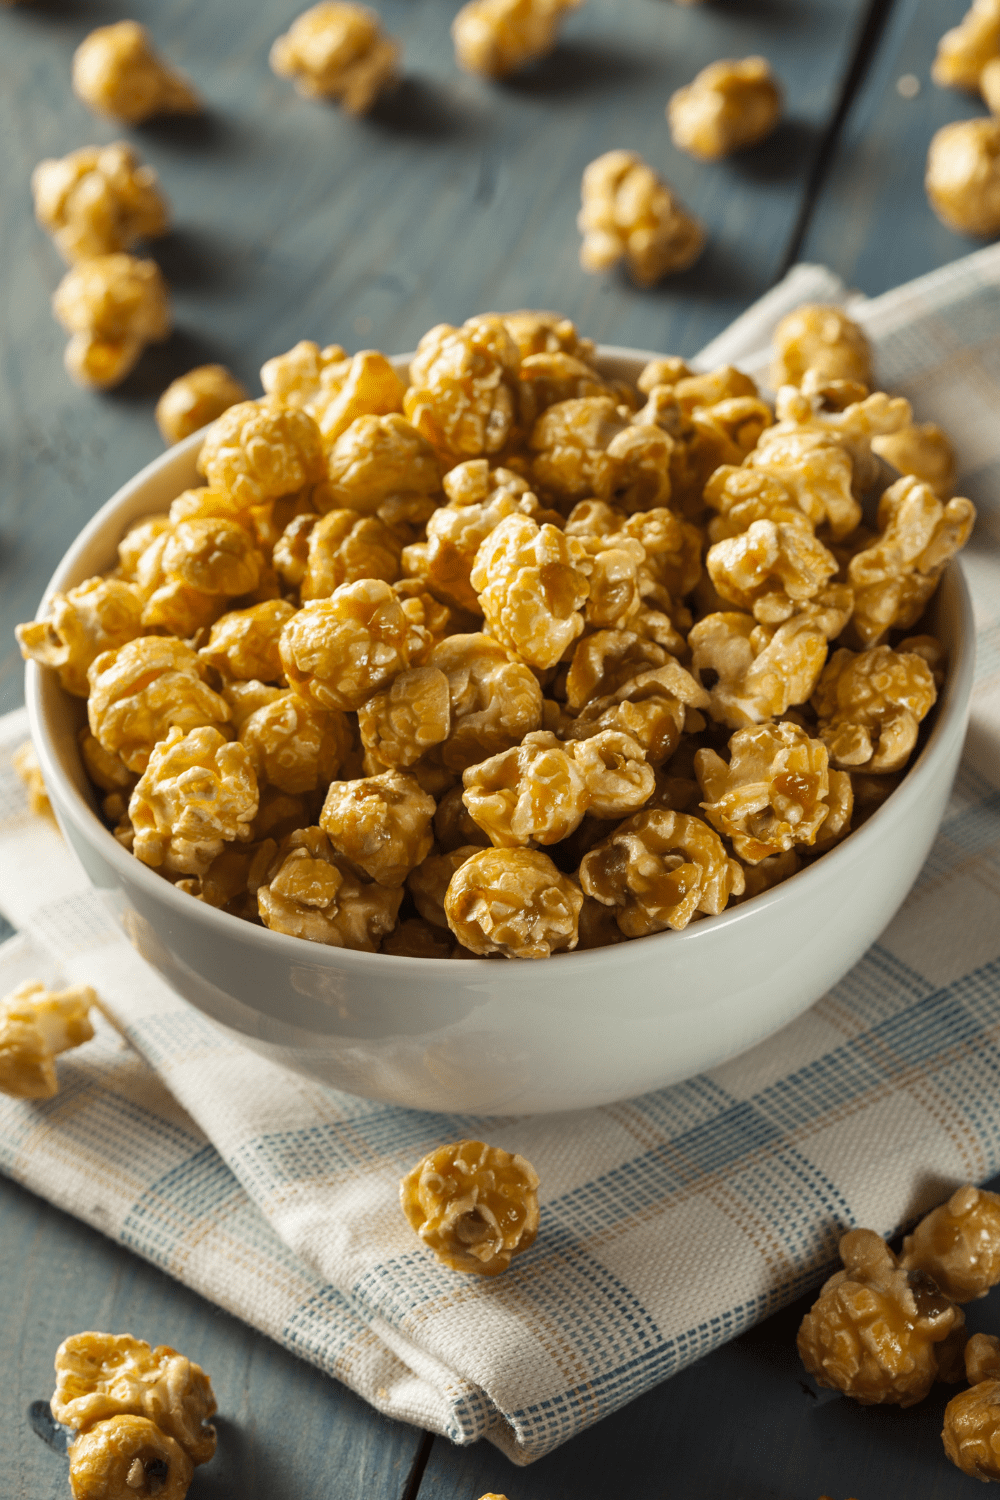 Microwave Caramel Popcorn in a White Bowl